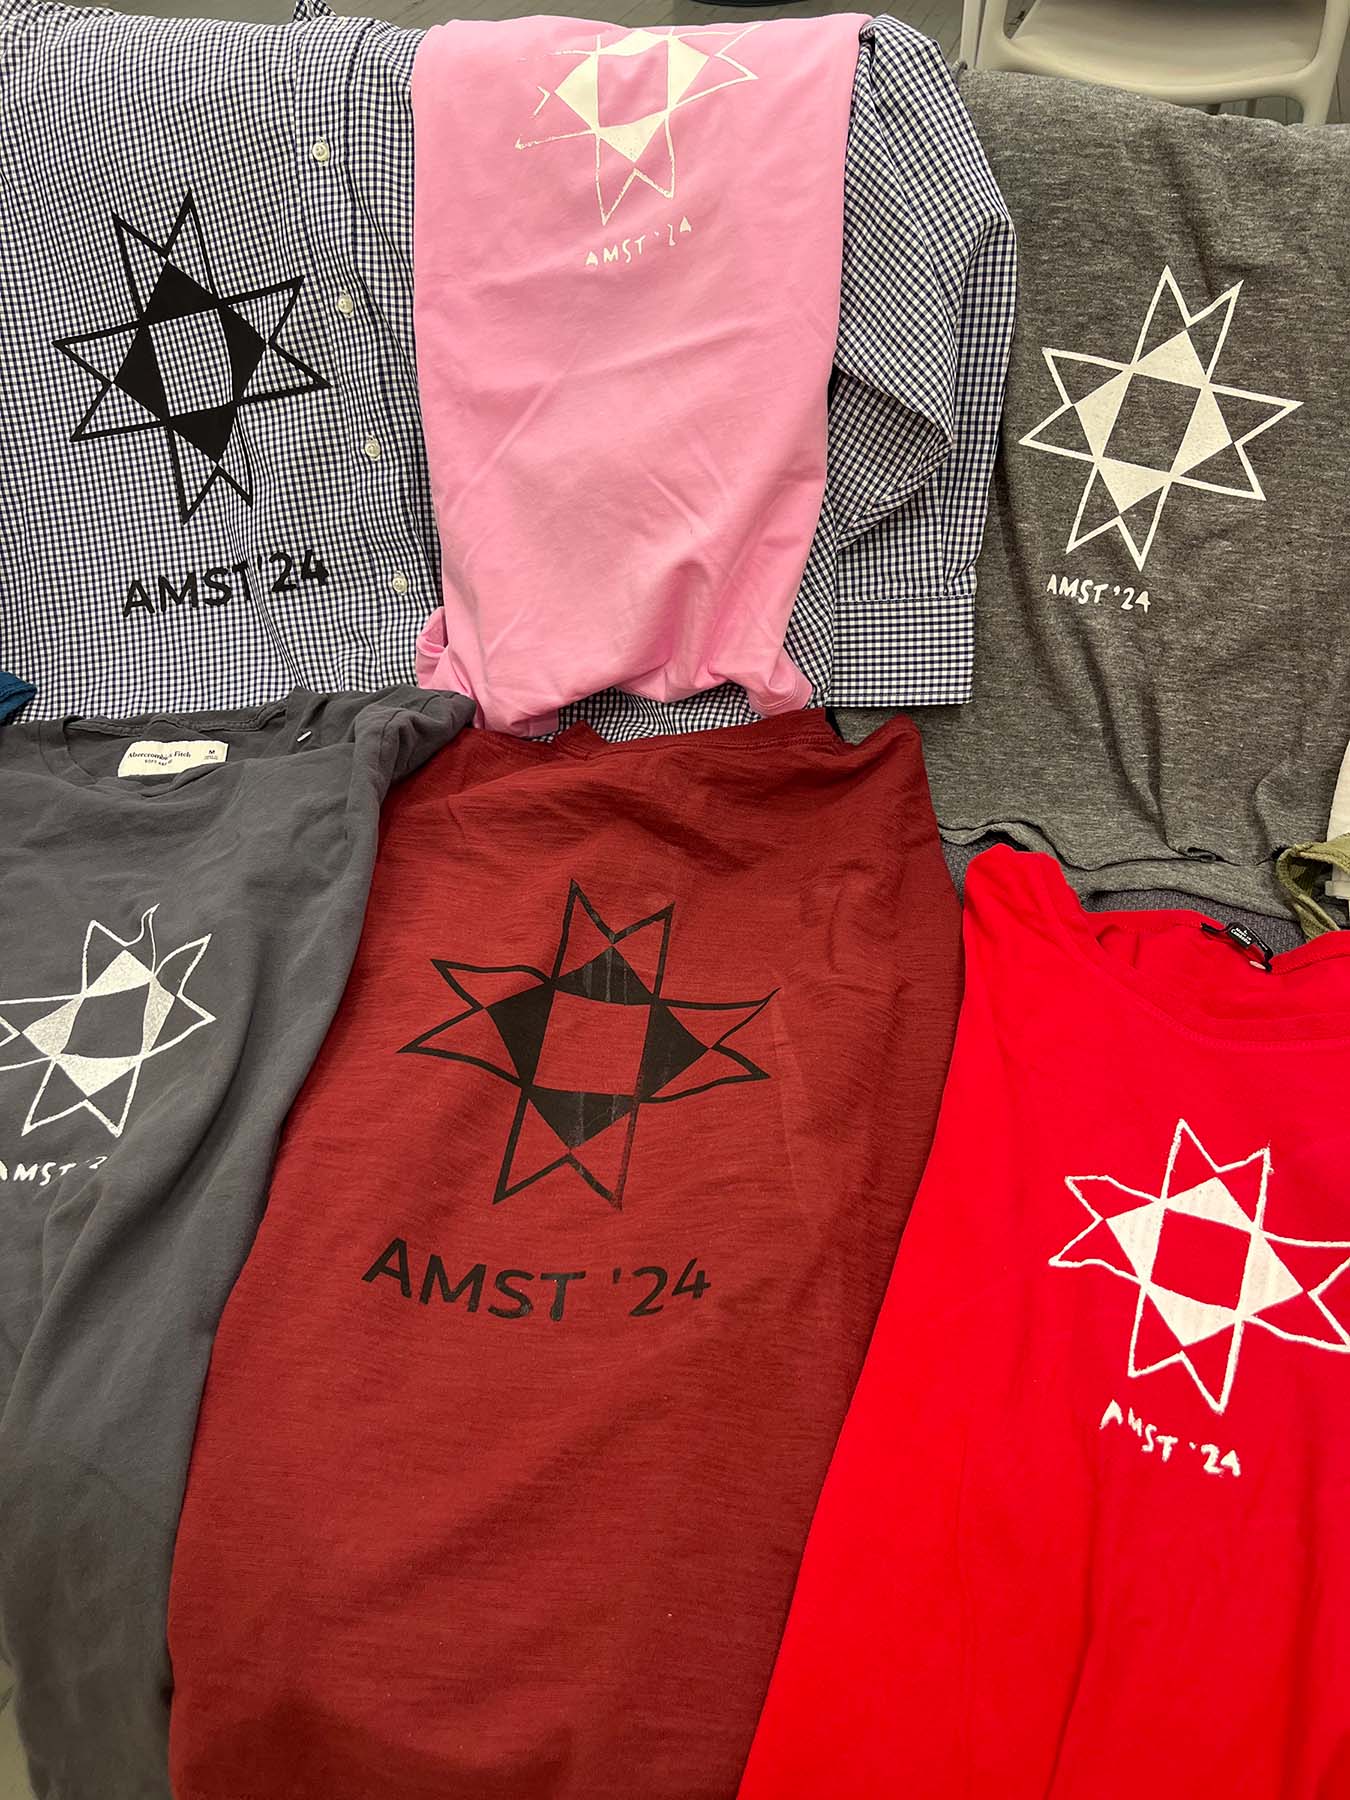 Gray, pink, and red screen printed t-shirts.